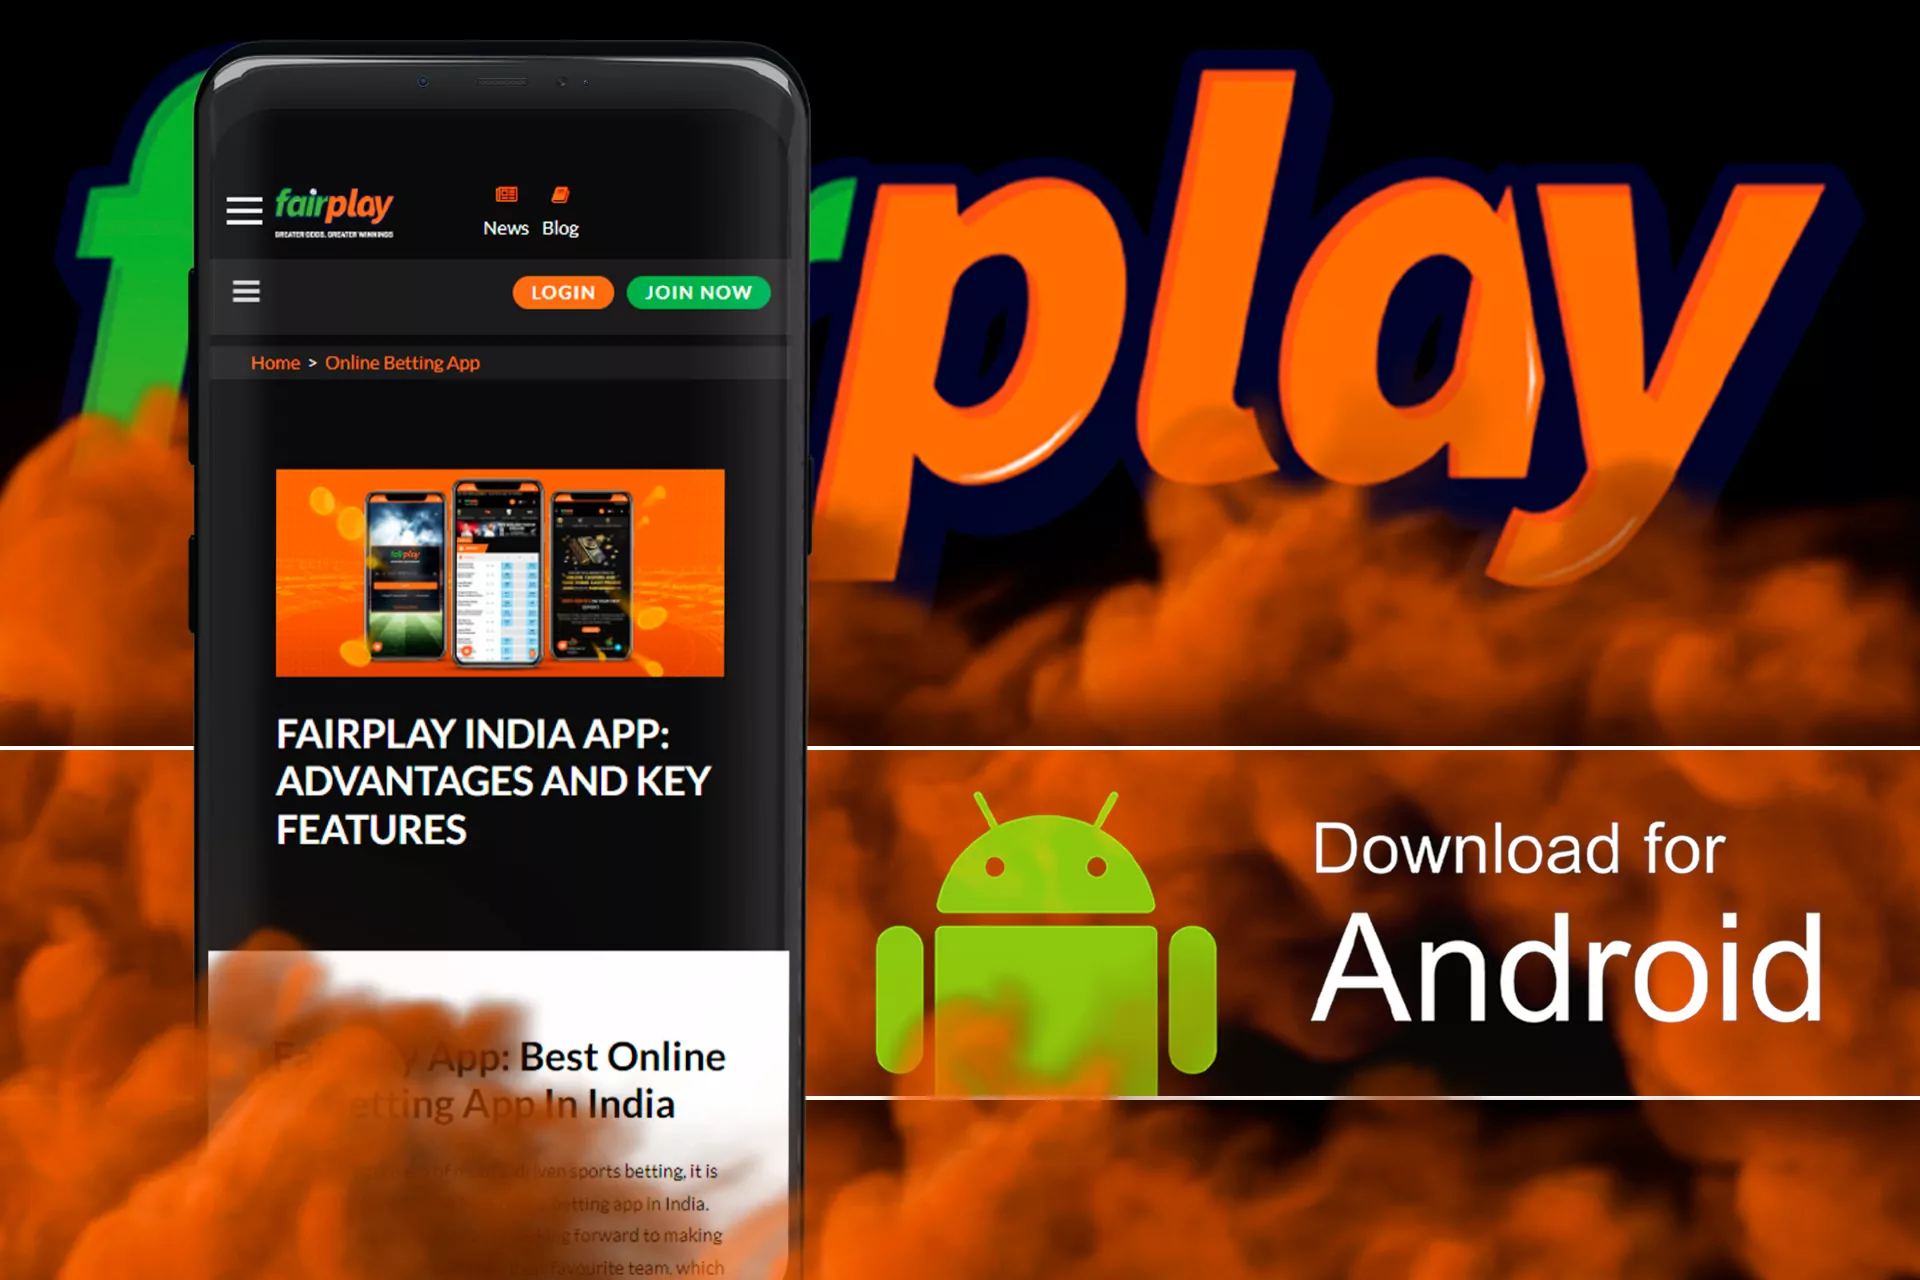 Download the Fairplay apk file and install the app to your device.